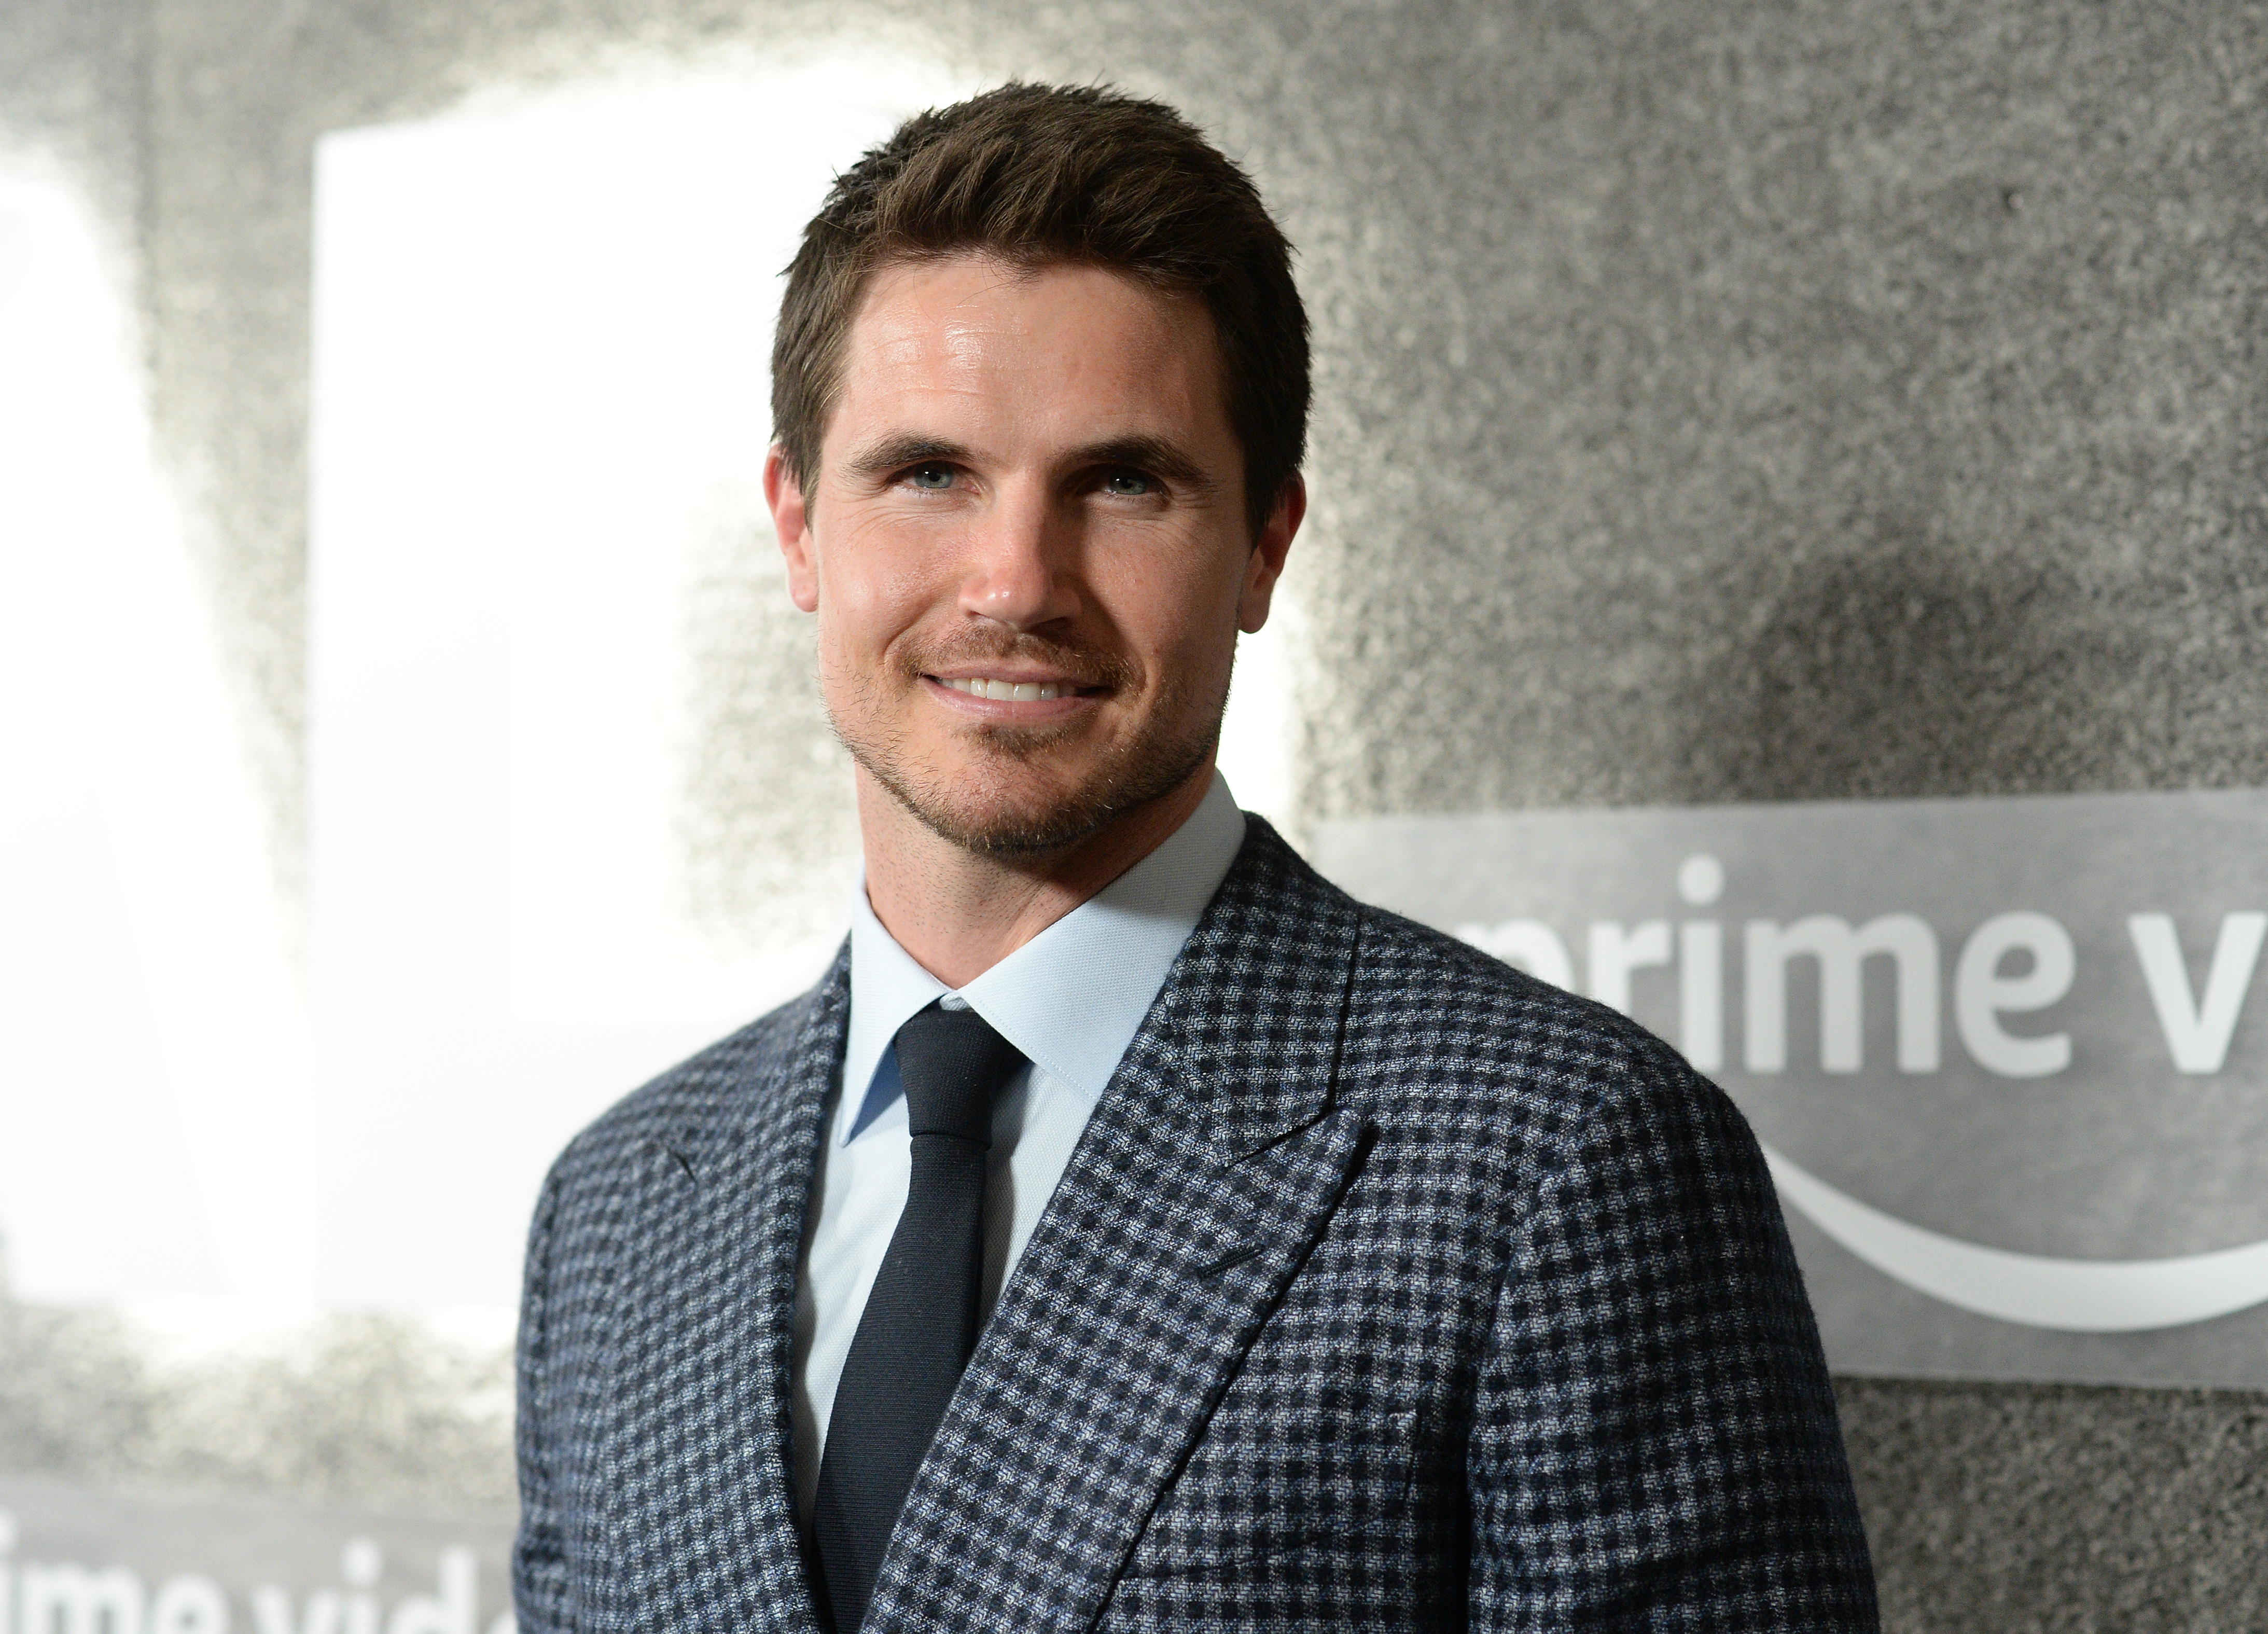 Robbie Amell at the "Upload" season 2 premiere on March 8, 2022, in West Hollywood, California. | Source: Getty Images